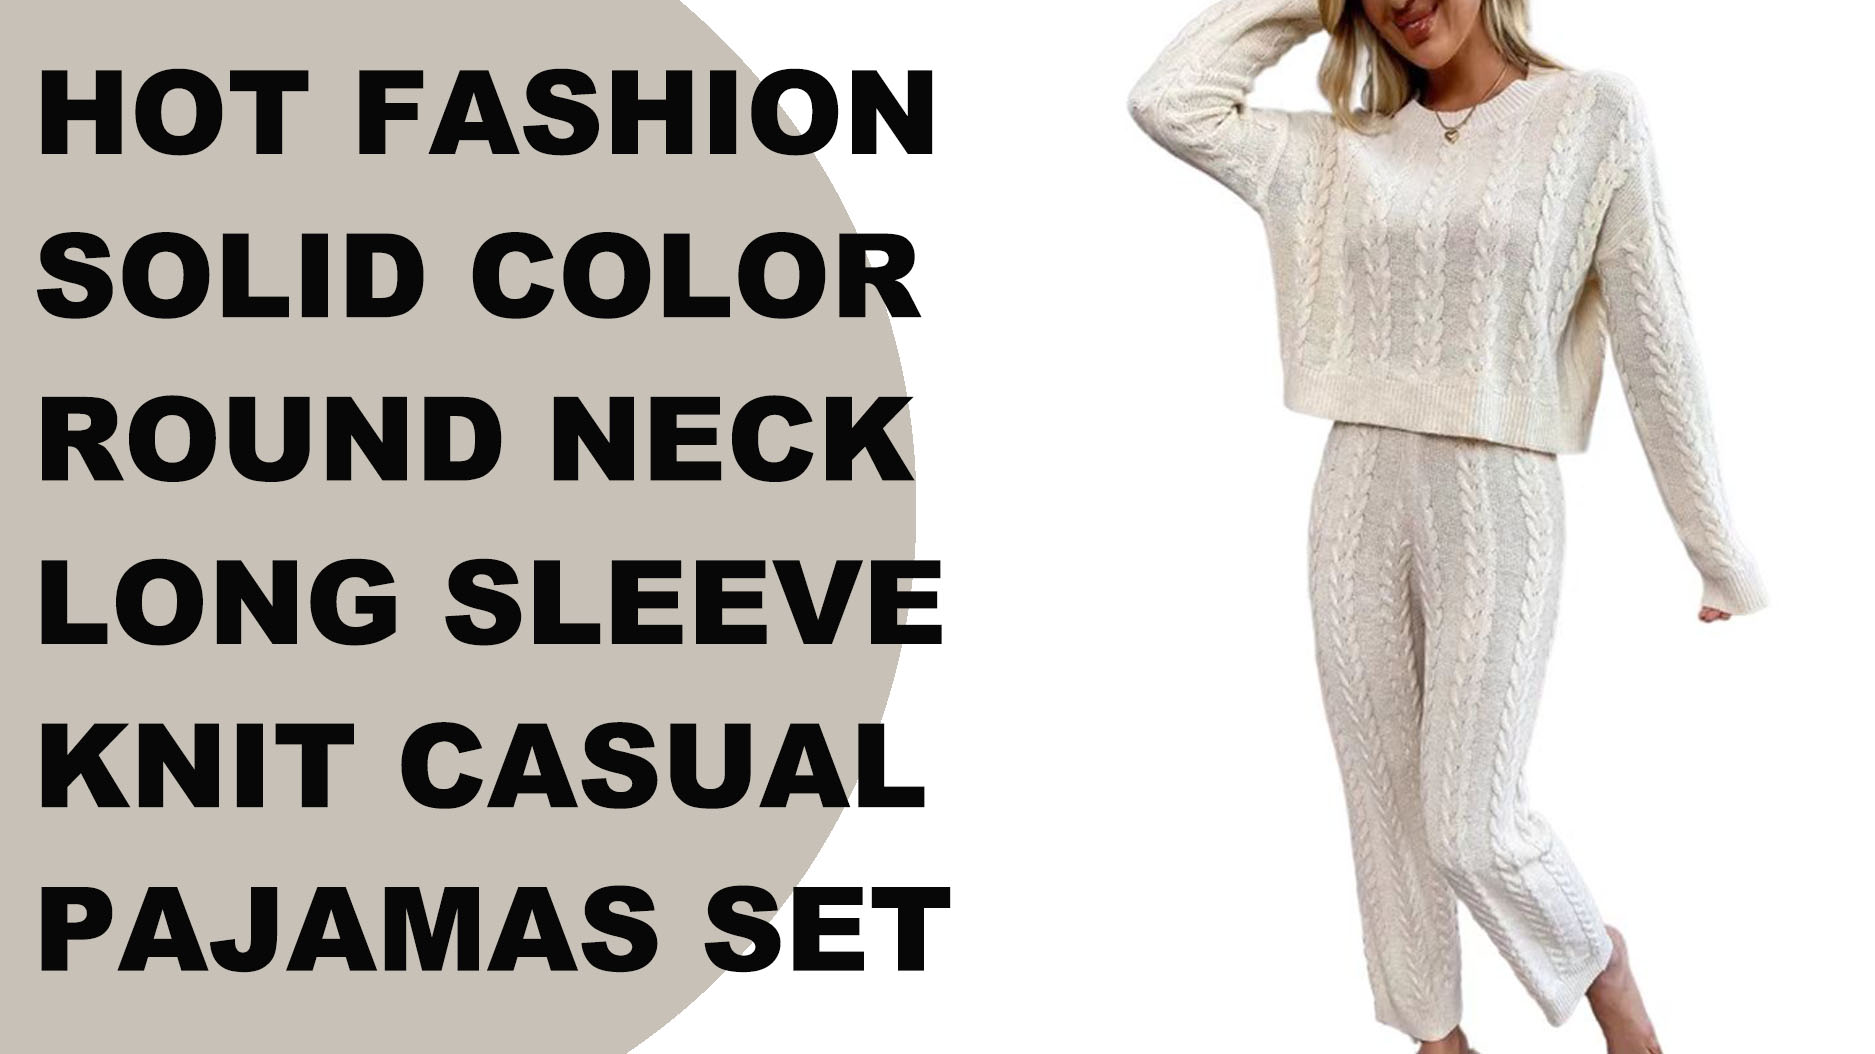 Knit Casual Pajamas Set Solid Color Round Neck Long Sleeve